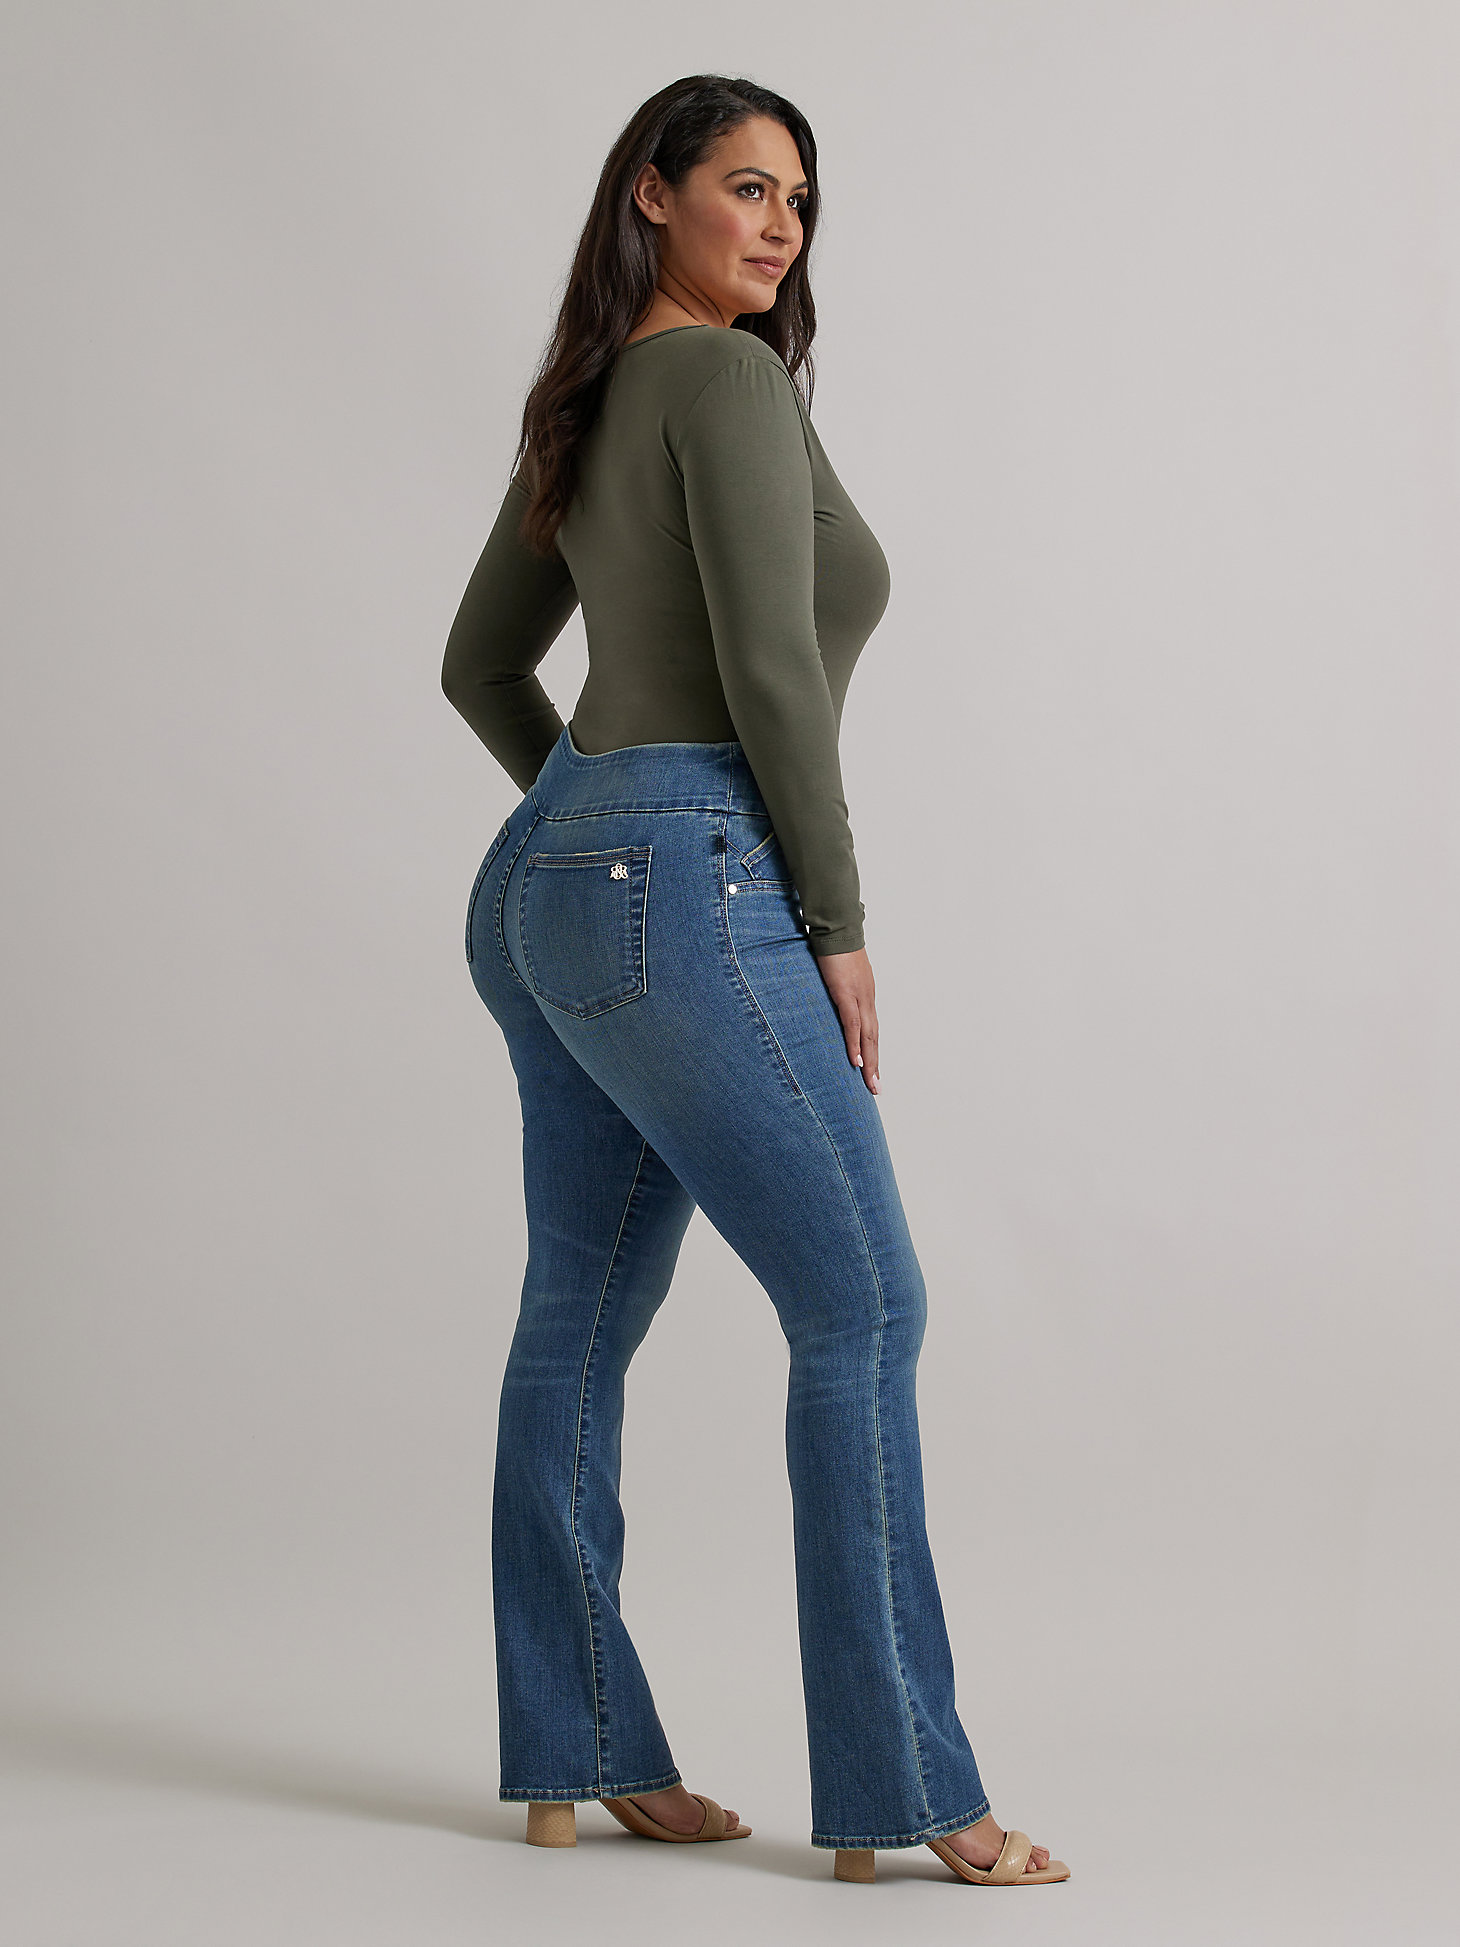 Women's Fever Bootcut Jean in That Girl alternative view 5